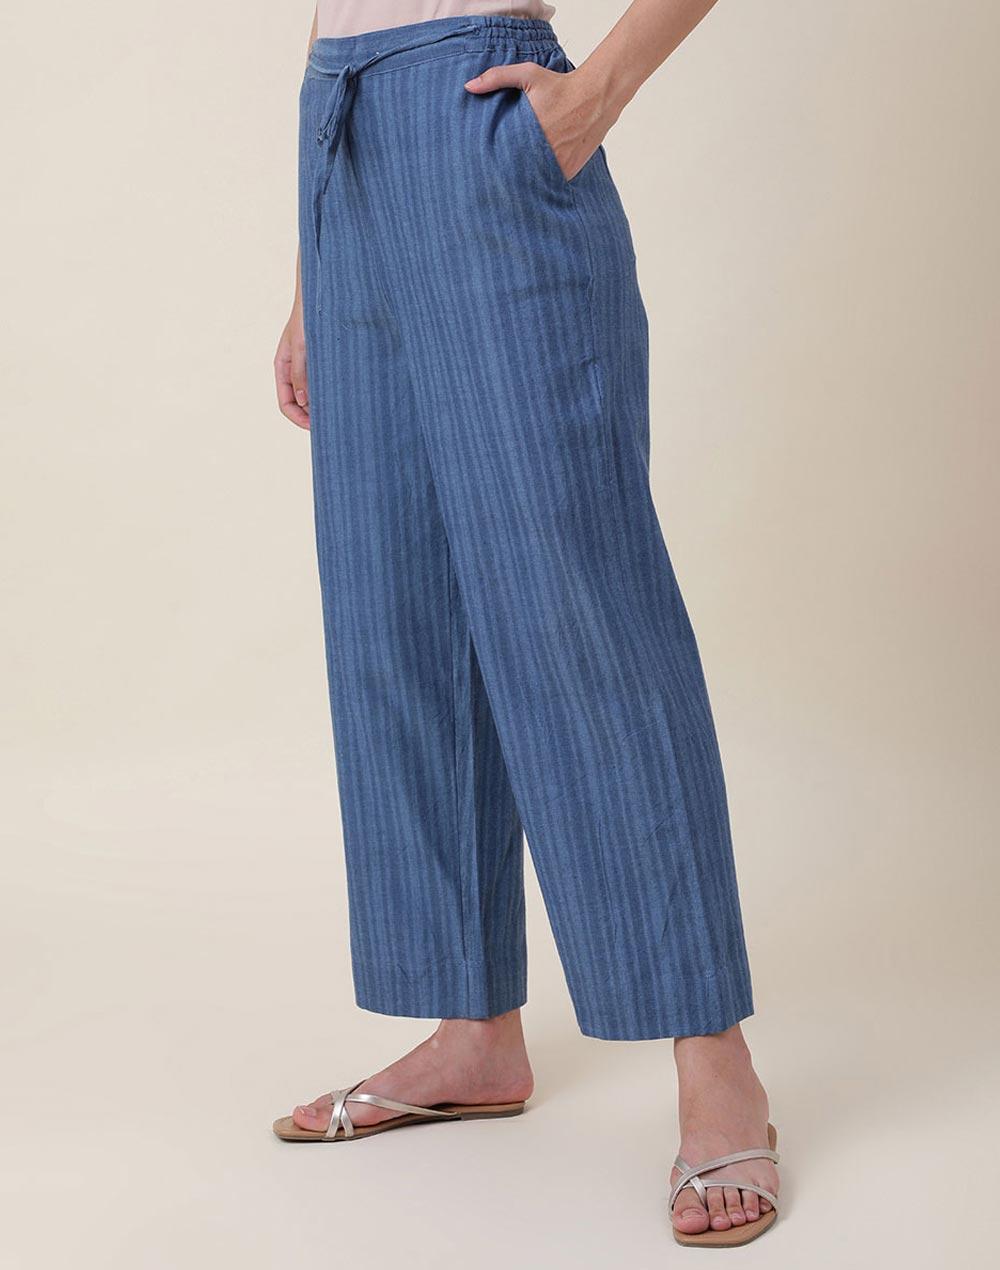 blue cotton full length casual pant